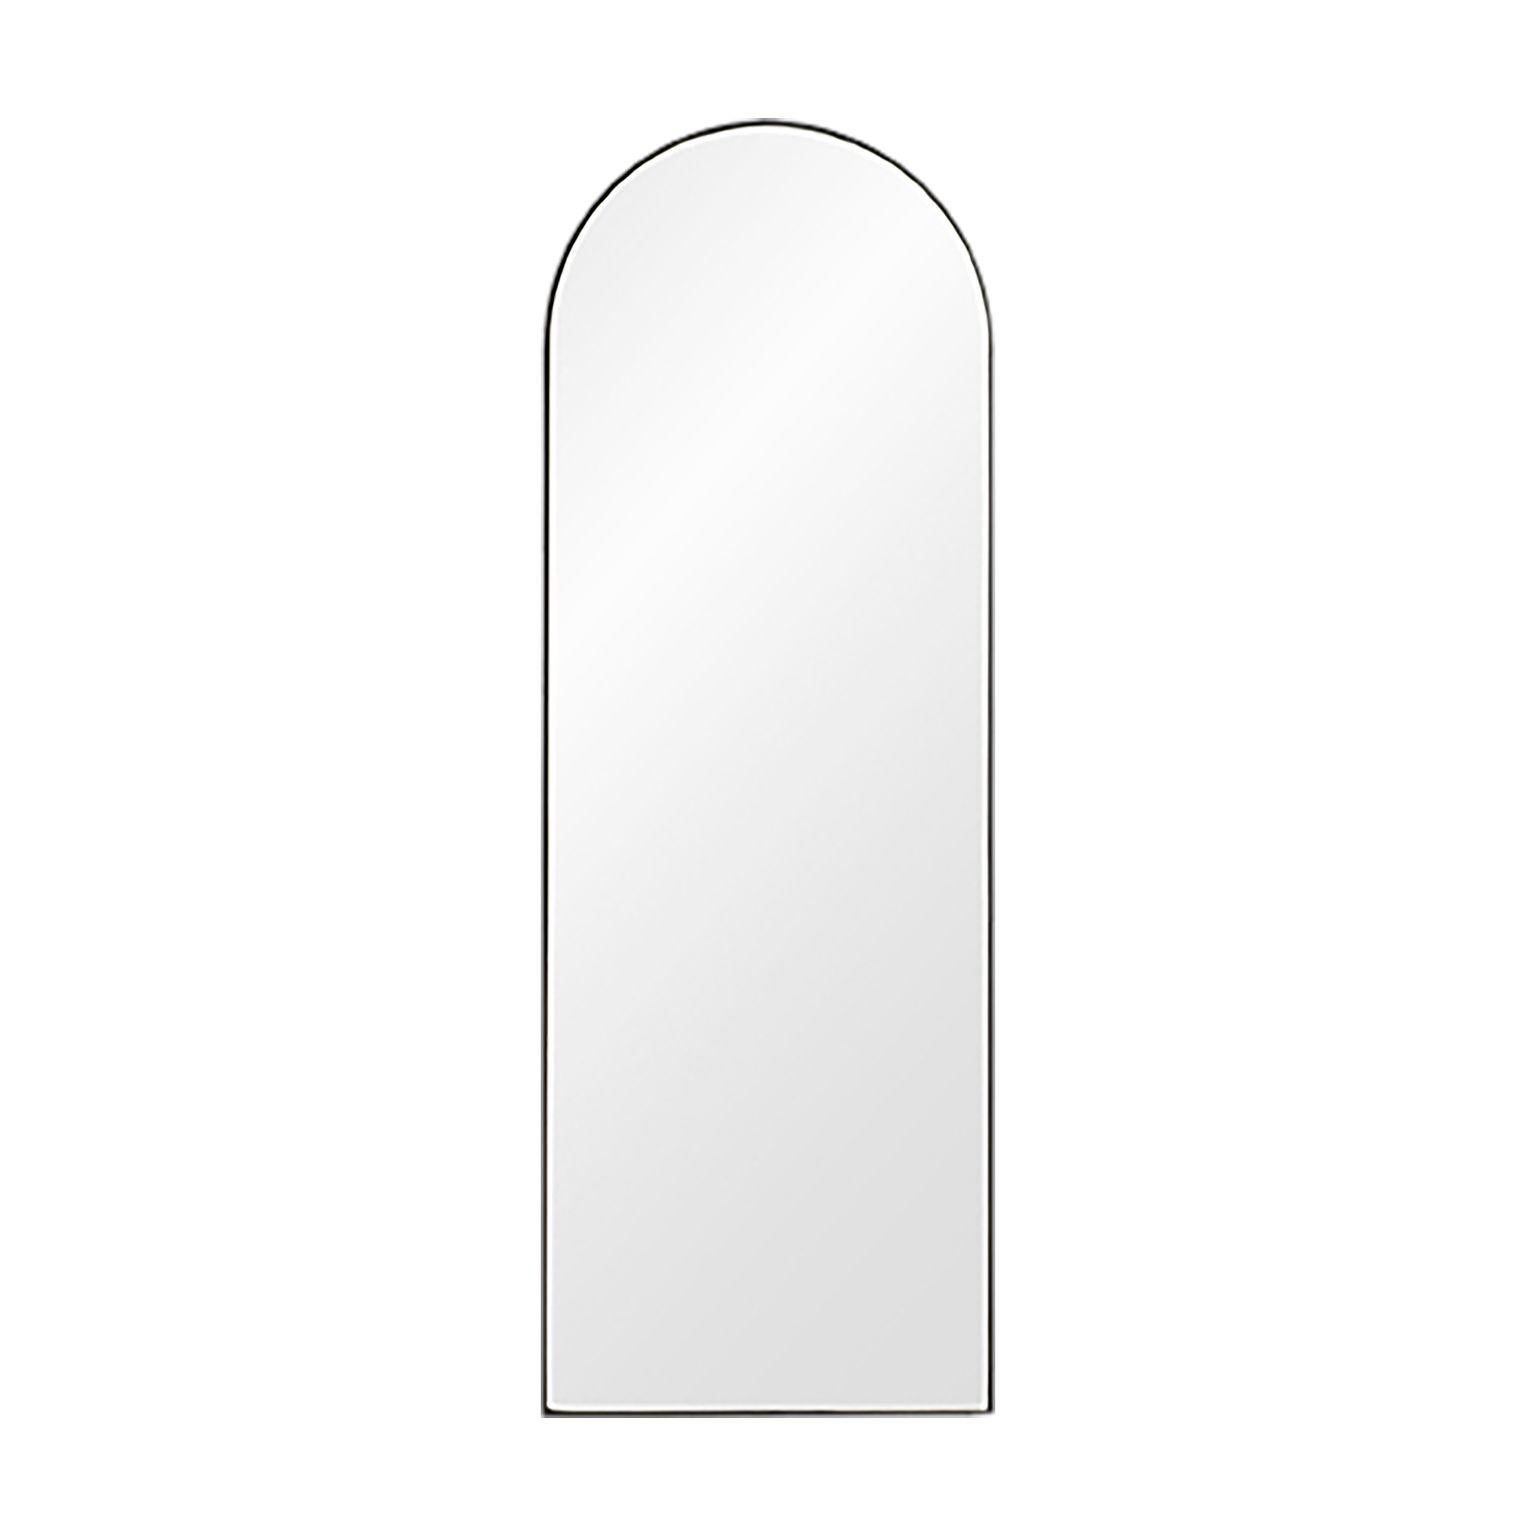 Arcade minimalist mirror
Dimensions: L 45 x W 2.5 x H 115 cm
Materials: Mirror, MDF

These mirrors draws associations to arcades, an old architectural element that date back thousands of years. Arcades has been used in ancient Roman architecture